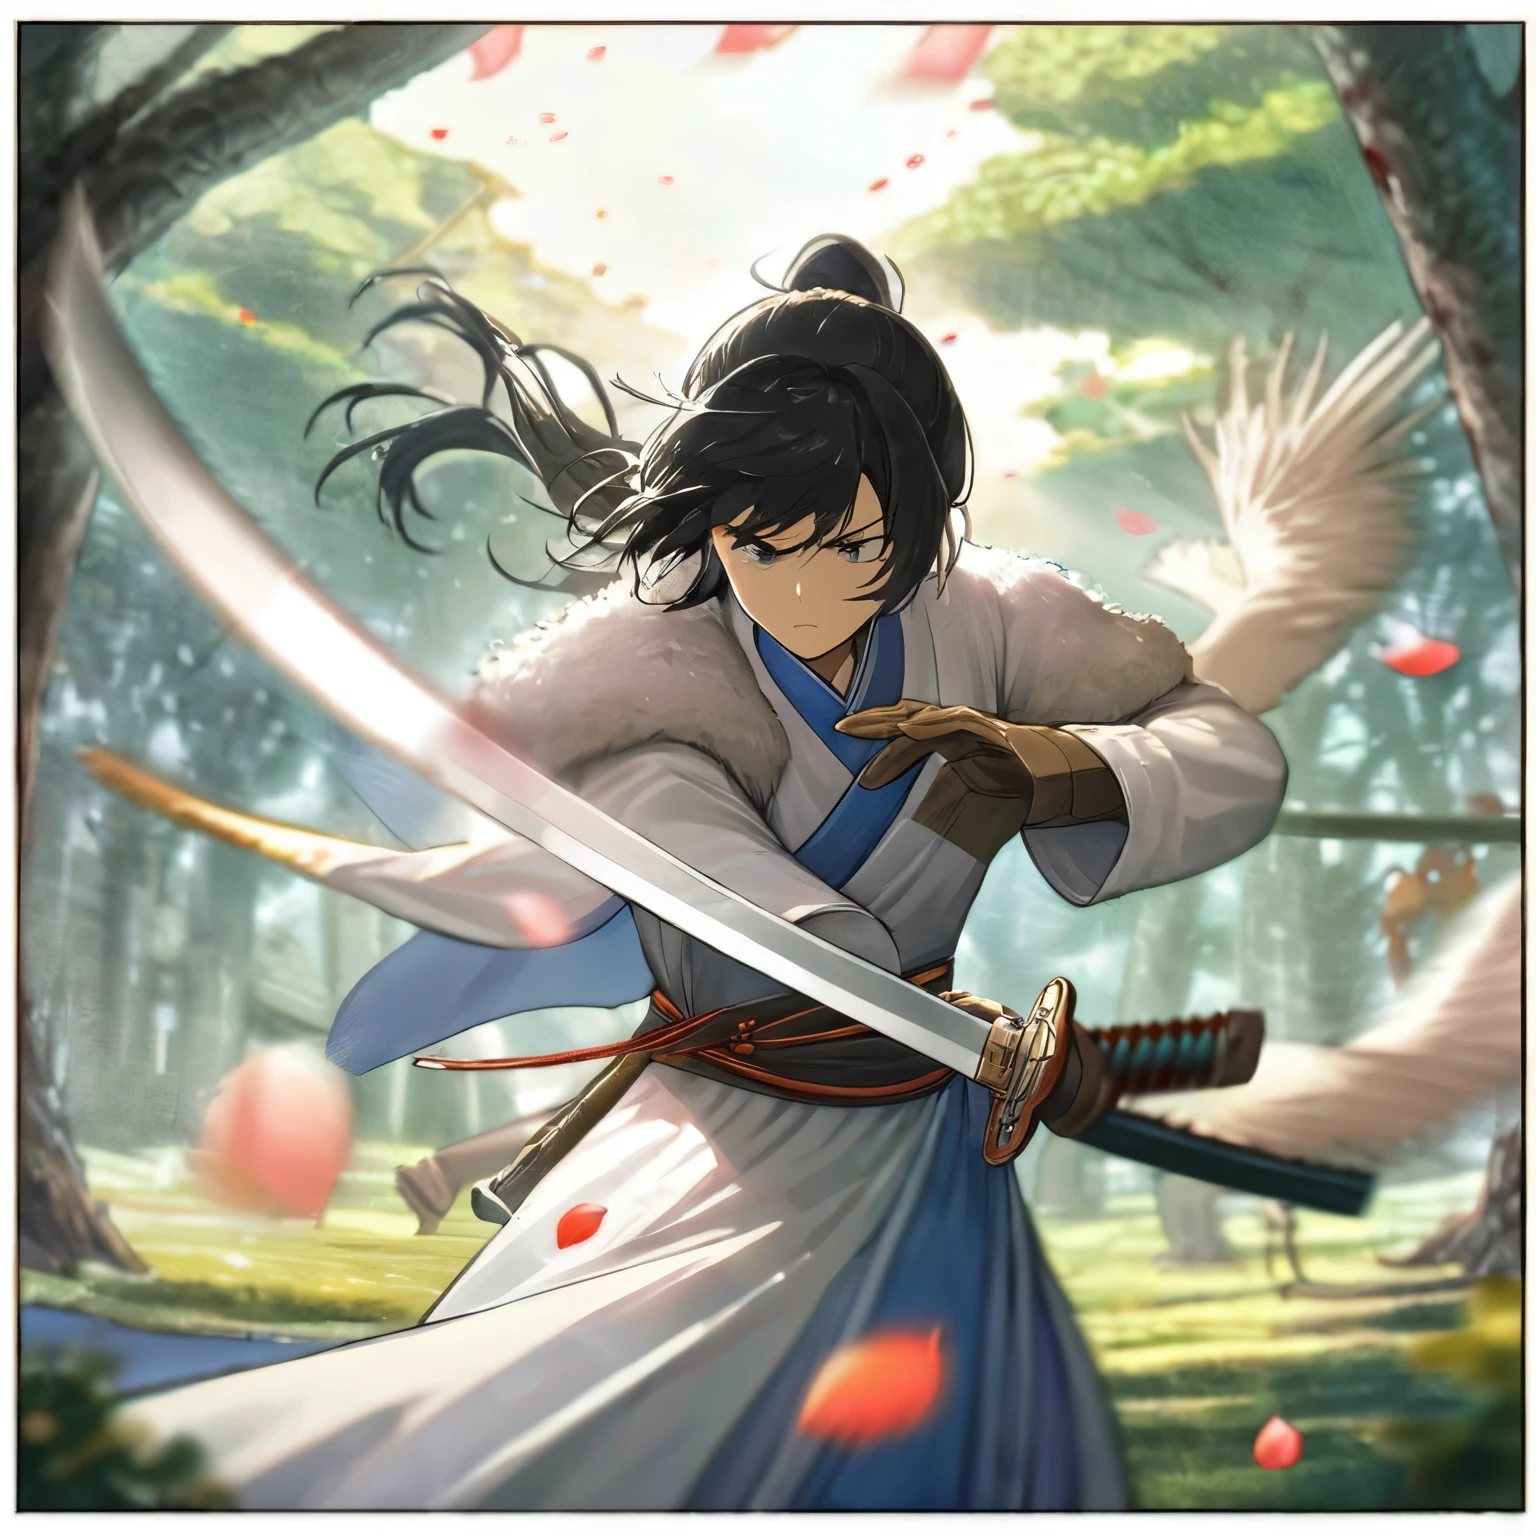 (windy),(blood),(motion blur),(dress in white),Petals fluttering in the wind, shining swords, helpless expression, anger, fighting with death, very detailed expression, very detailed petals,ponytail, 2swordsman fighting,fight,gongfu,stand in trees, 2swordsman stood in a peach tree forest with petals dancing,petals , detailed ,completing the stable diffusion of serenity and contentment,masterpiece, best quality,masterpiece, best quality, swordman,holding a sword(trees:0.5),(eagle:0.5), (bamboo:0.2) fighting stance, 1man, glowing, solo, weapon, sword, tree, holding, gloves, outdoors, sheath, border, holding weapon, black hair, holding sword, fur trim, looking away,look at view